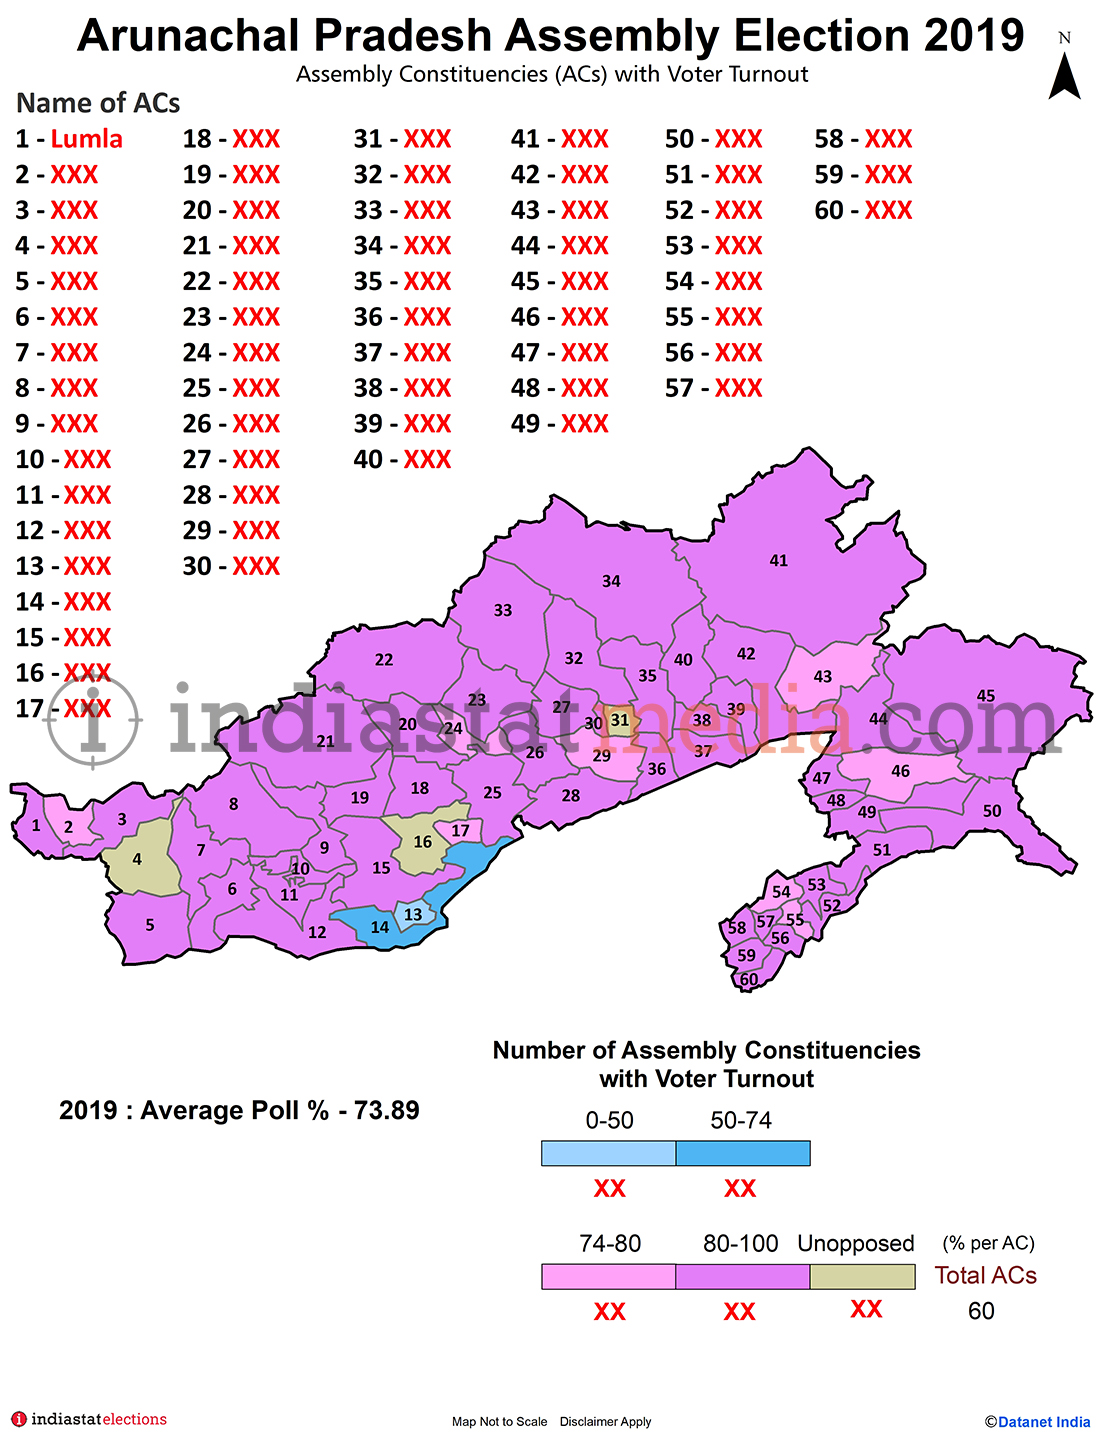 Assembly Constituencies (ACs) with Voter Turnout in Arunachal Pradesh (Assembly Election - 2019)